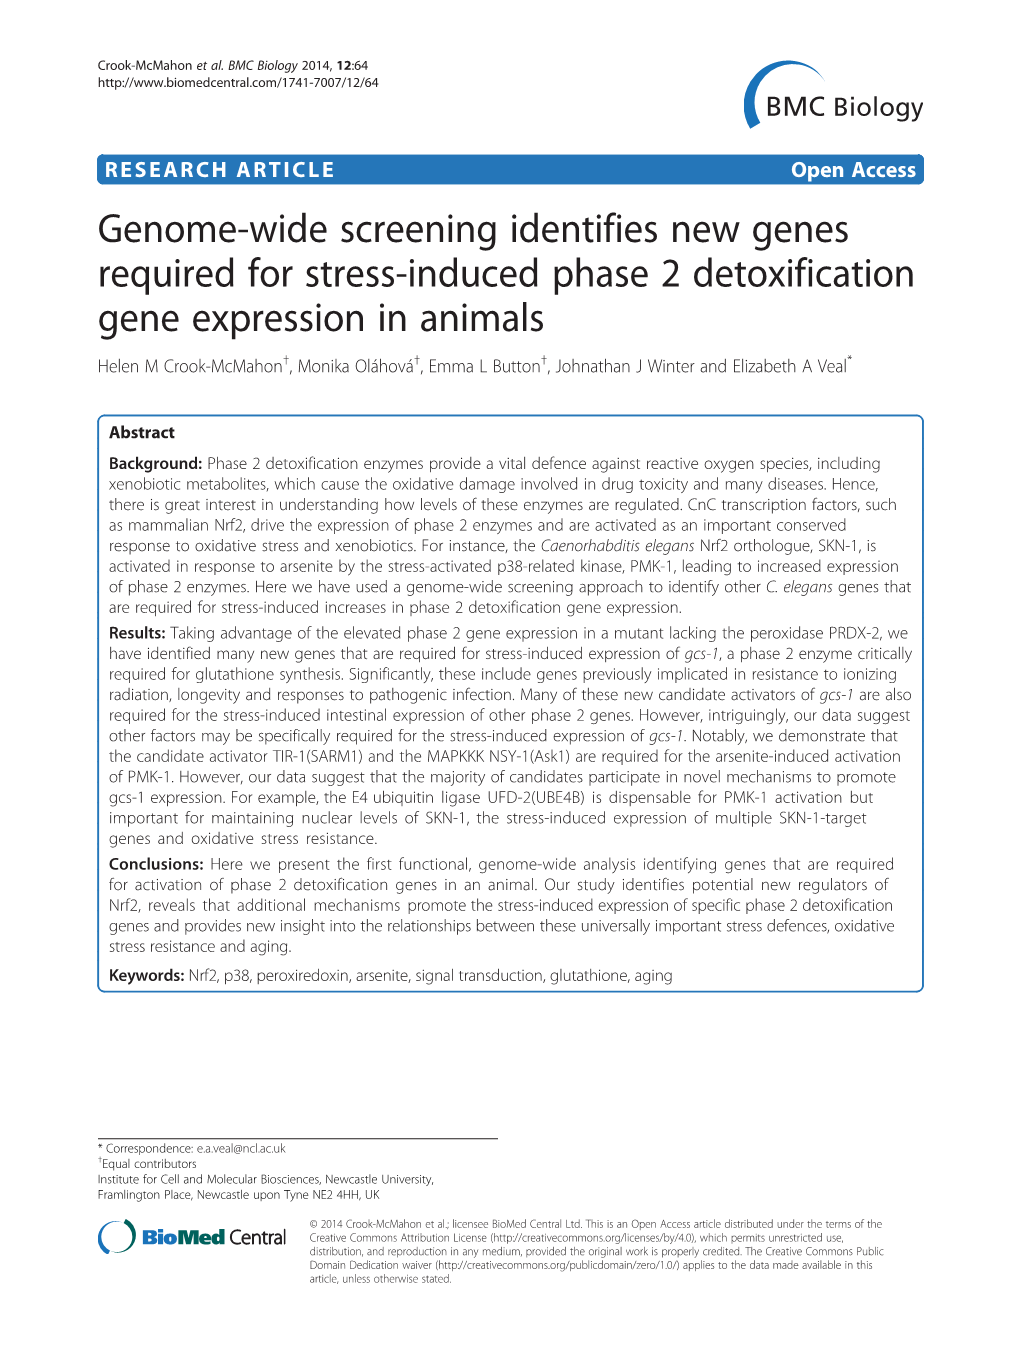 Genome-Wide Screening Identifies New Genes Required for Stress